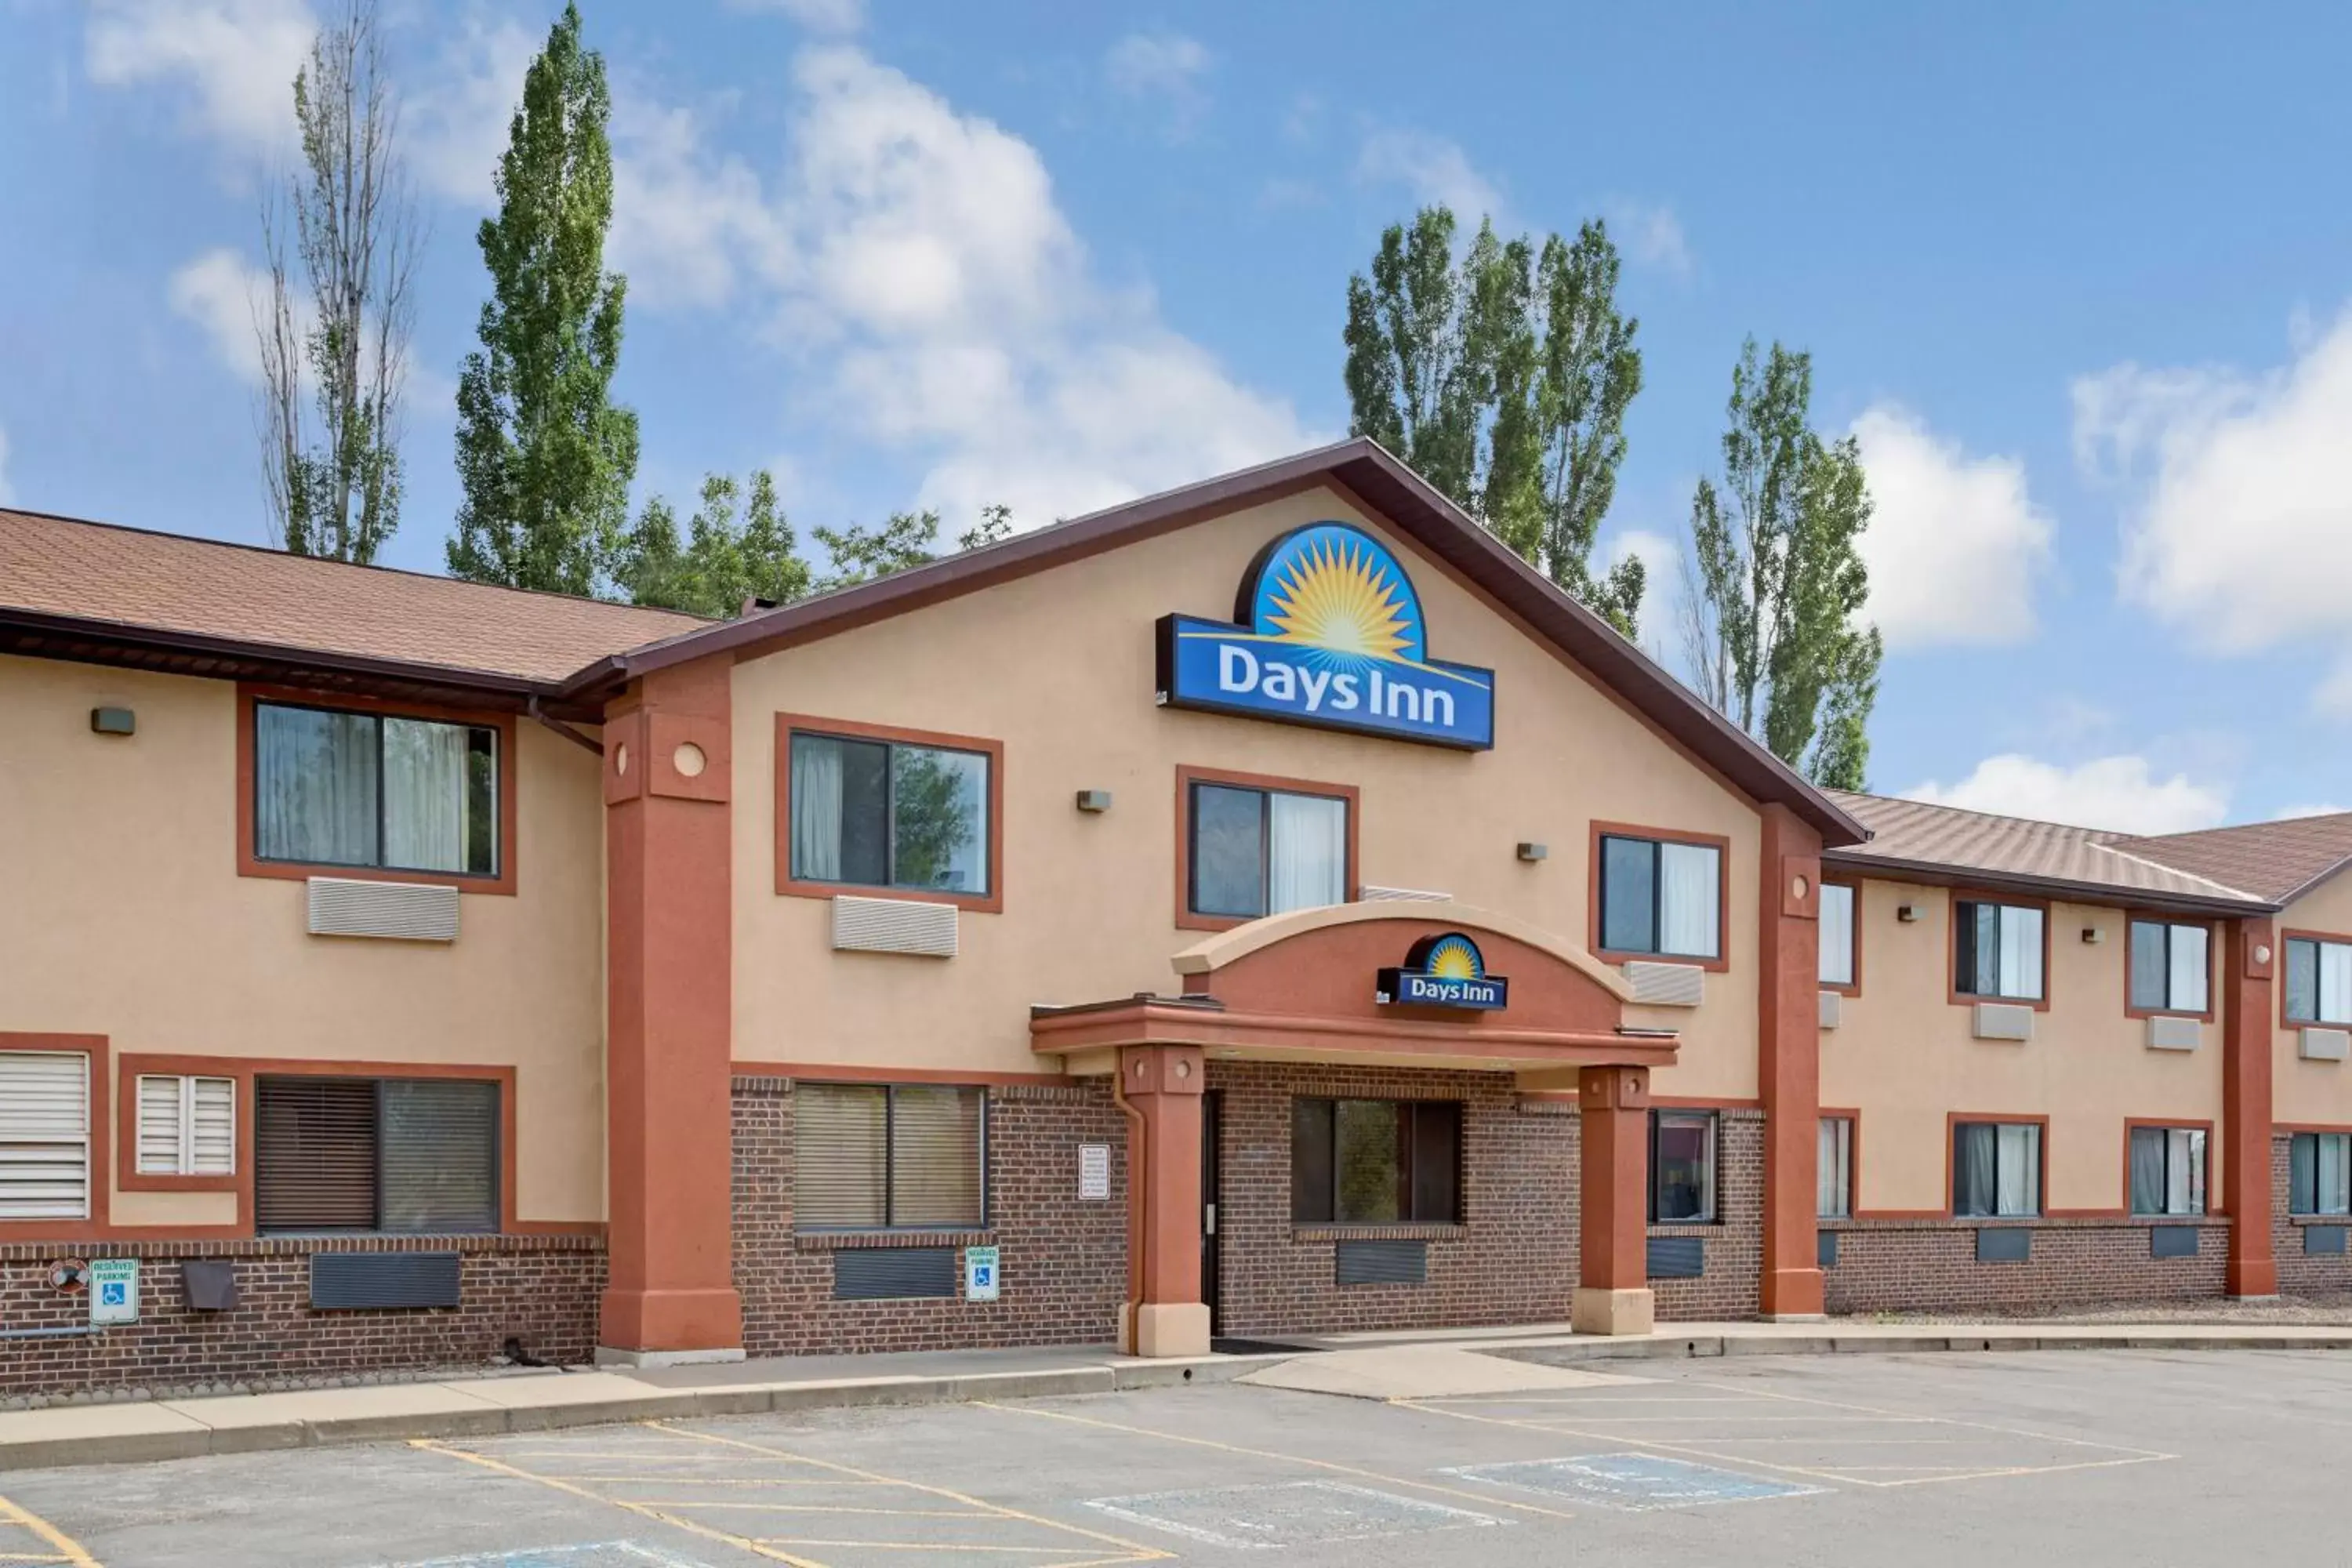 Facade/entrance, Property Building in Days Inn by Wyndham Clearfield